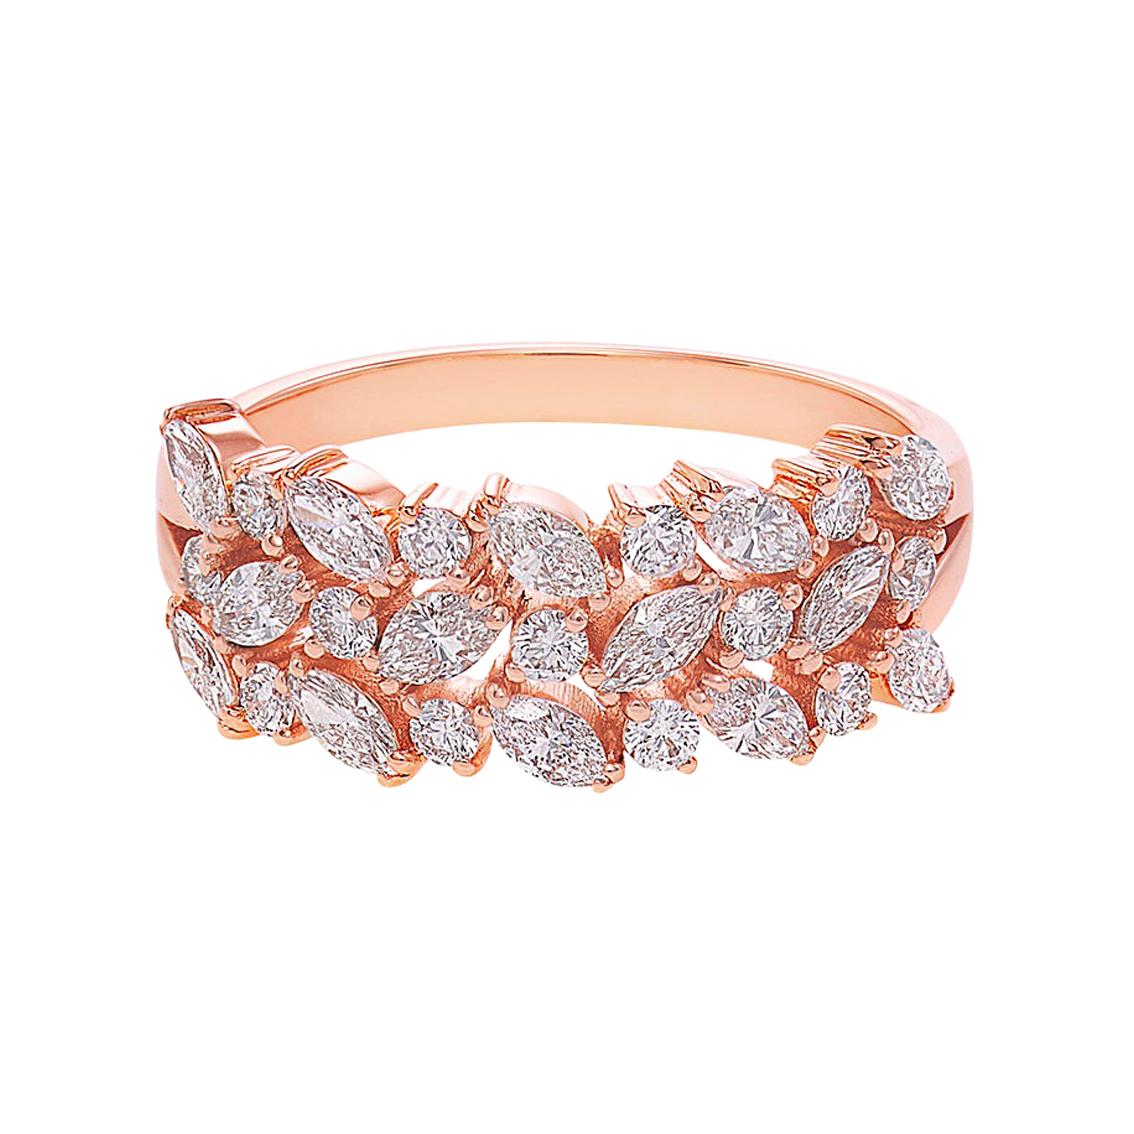 Three Rows Marquise Cut Diamond Unique Wedding Ring Band 18k Rose Gold